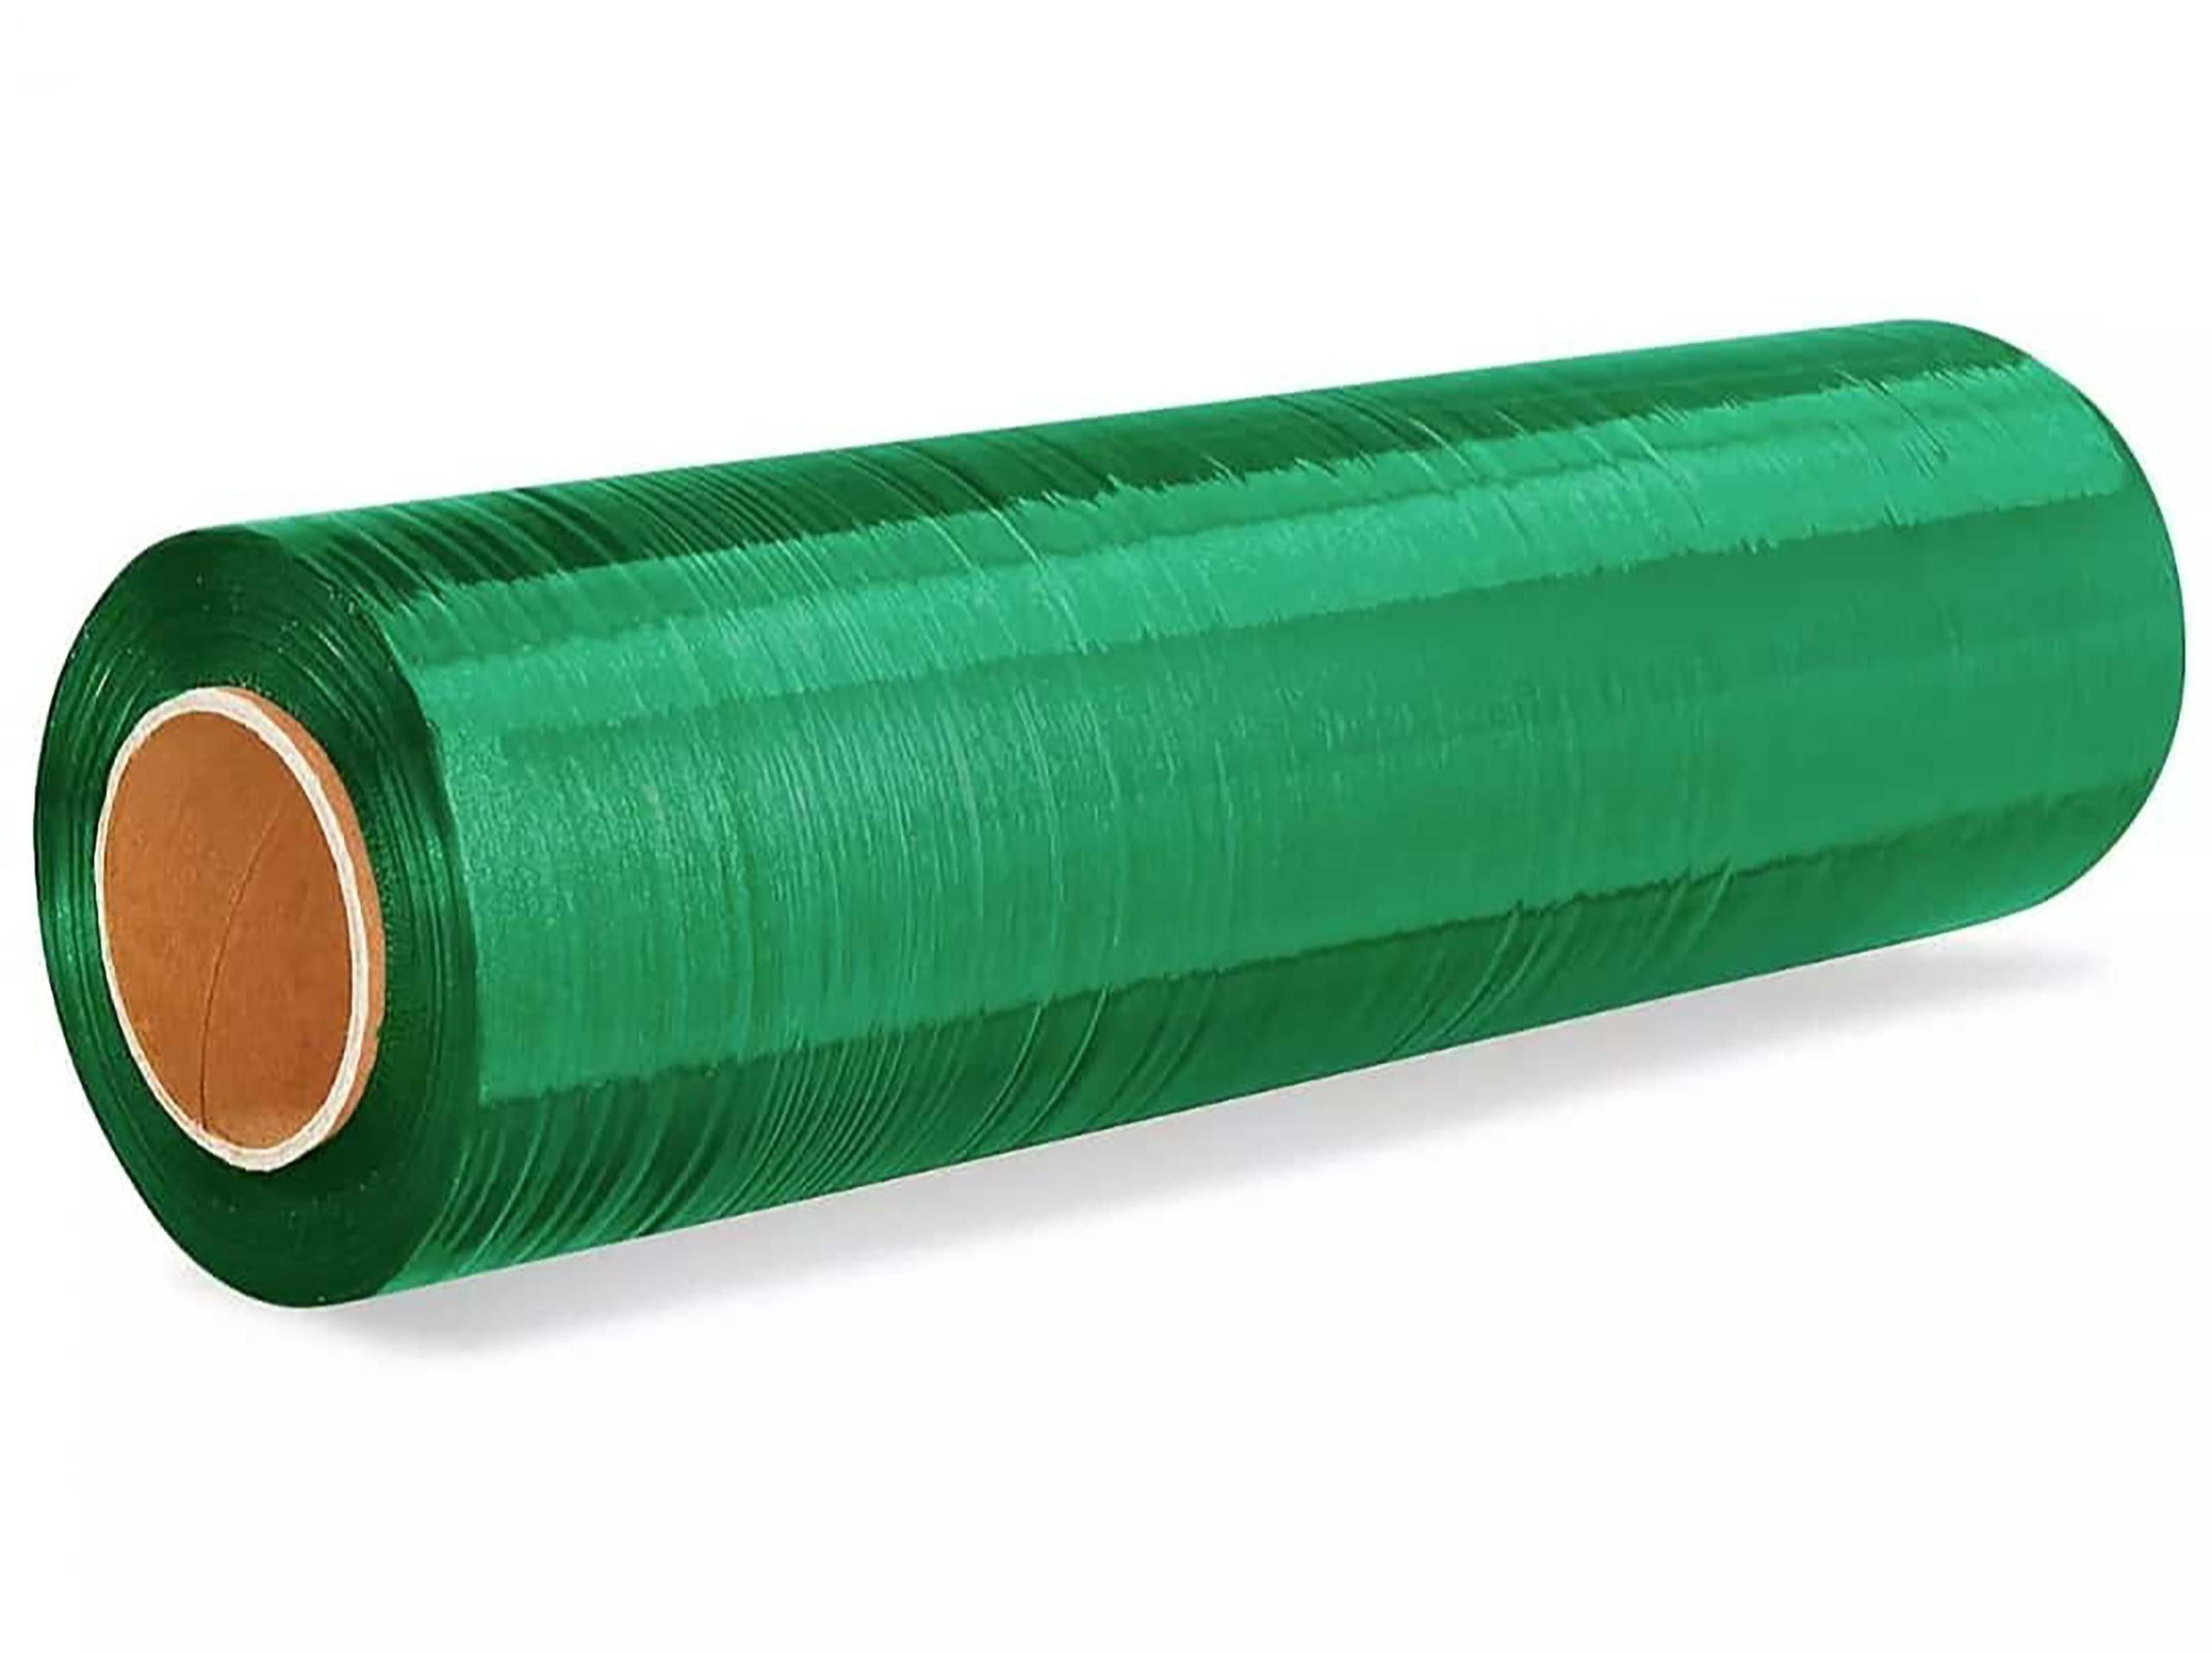 Benefits of Biodegradable Cling Film